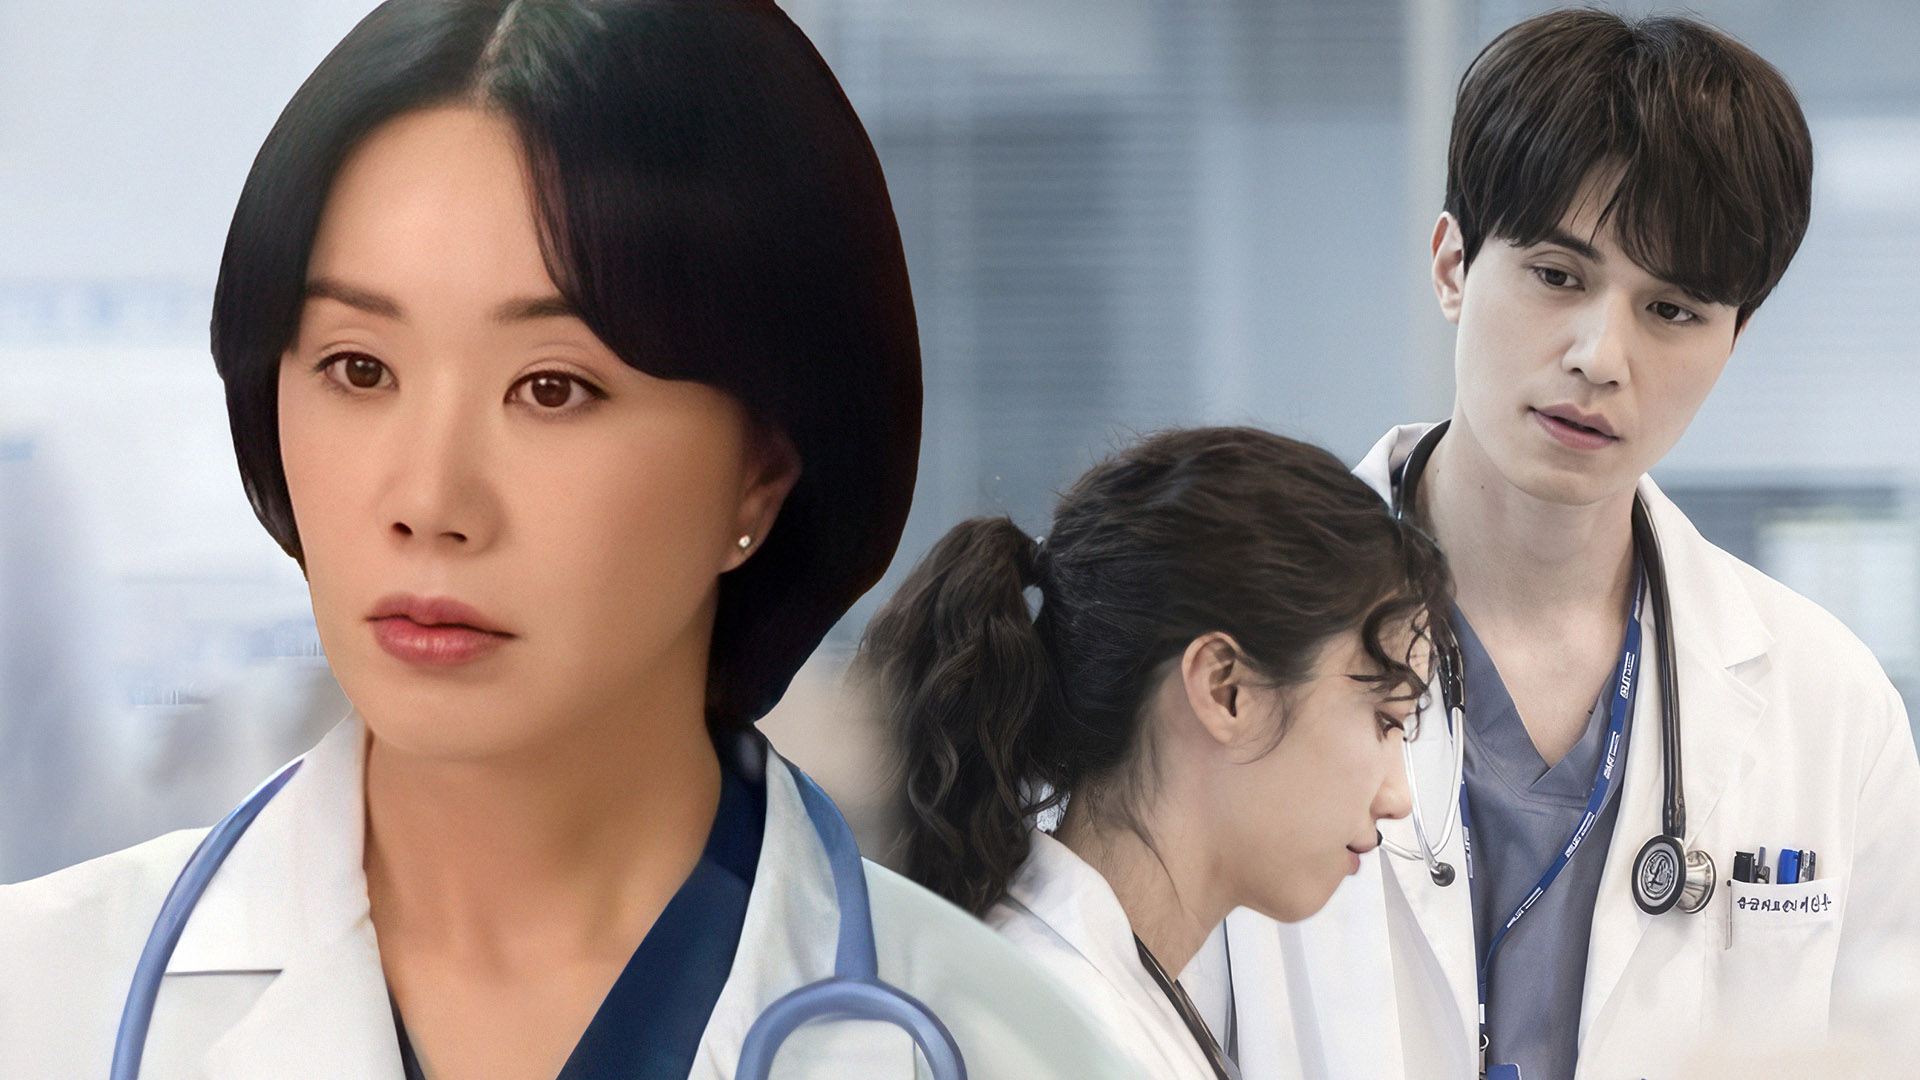 6 Medical K-Dramas Like 'Doctor Cha' to Watch on Netflix in January